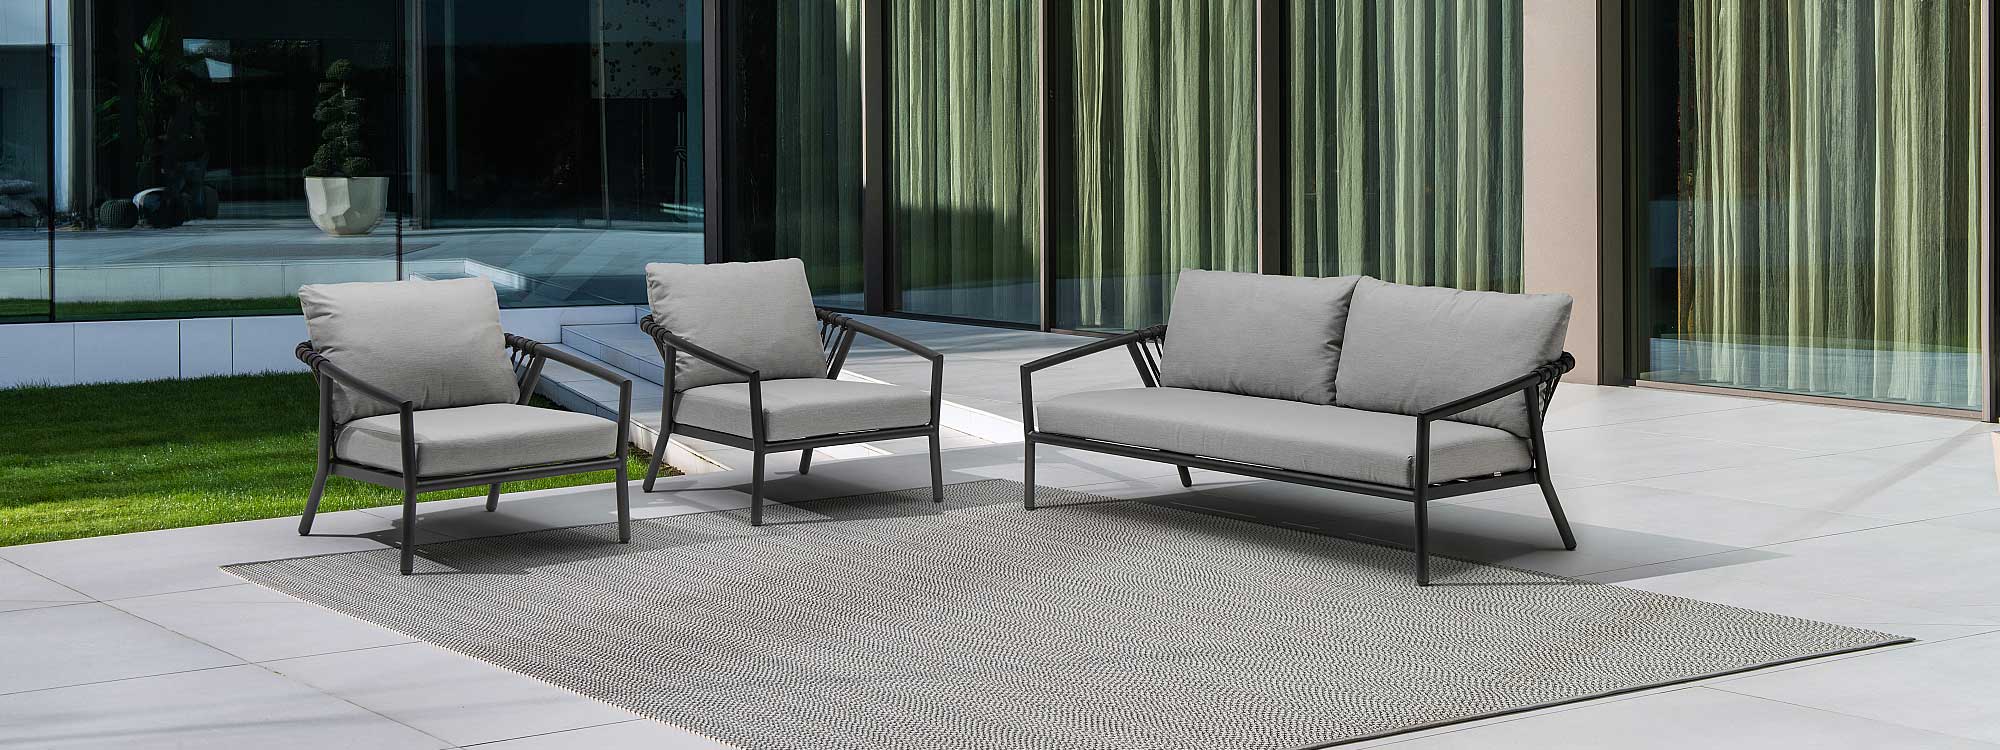 Image of Kapra modern garden sofa and lounge chairs with Charcoal tubular aluminium frames and Charcoal Black woven rope backs on minimalist terrace with floor to ceiling glass windows in the background